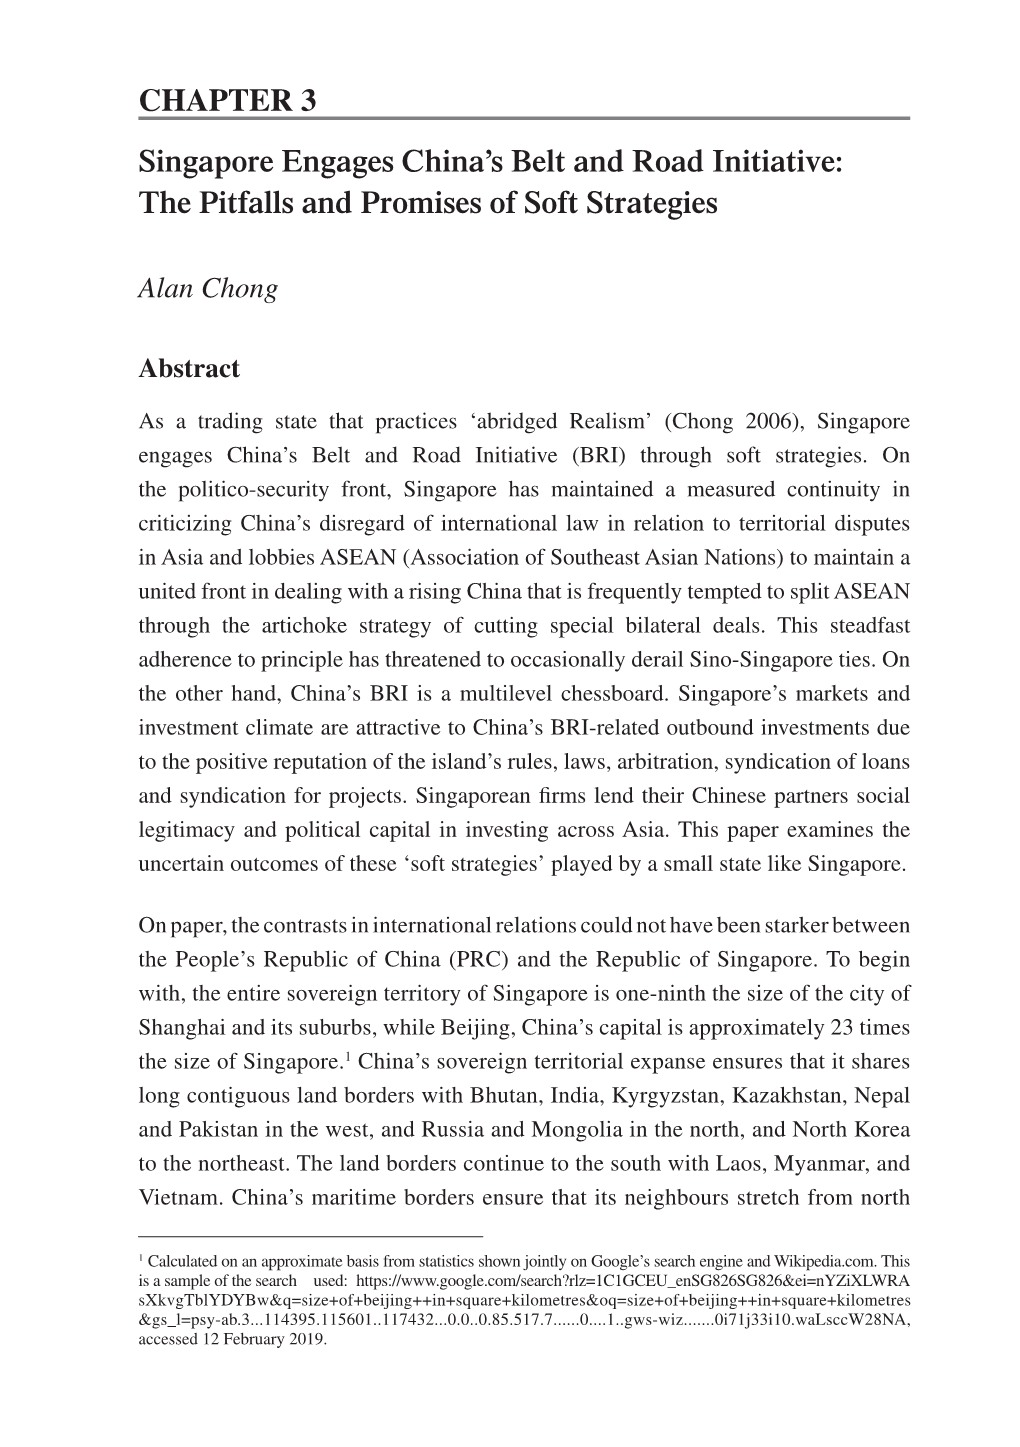 Singapore Engages China's Belt and Road Initiative: the Pitfalls and Promises of Soft Strategies CHAPTER 3